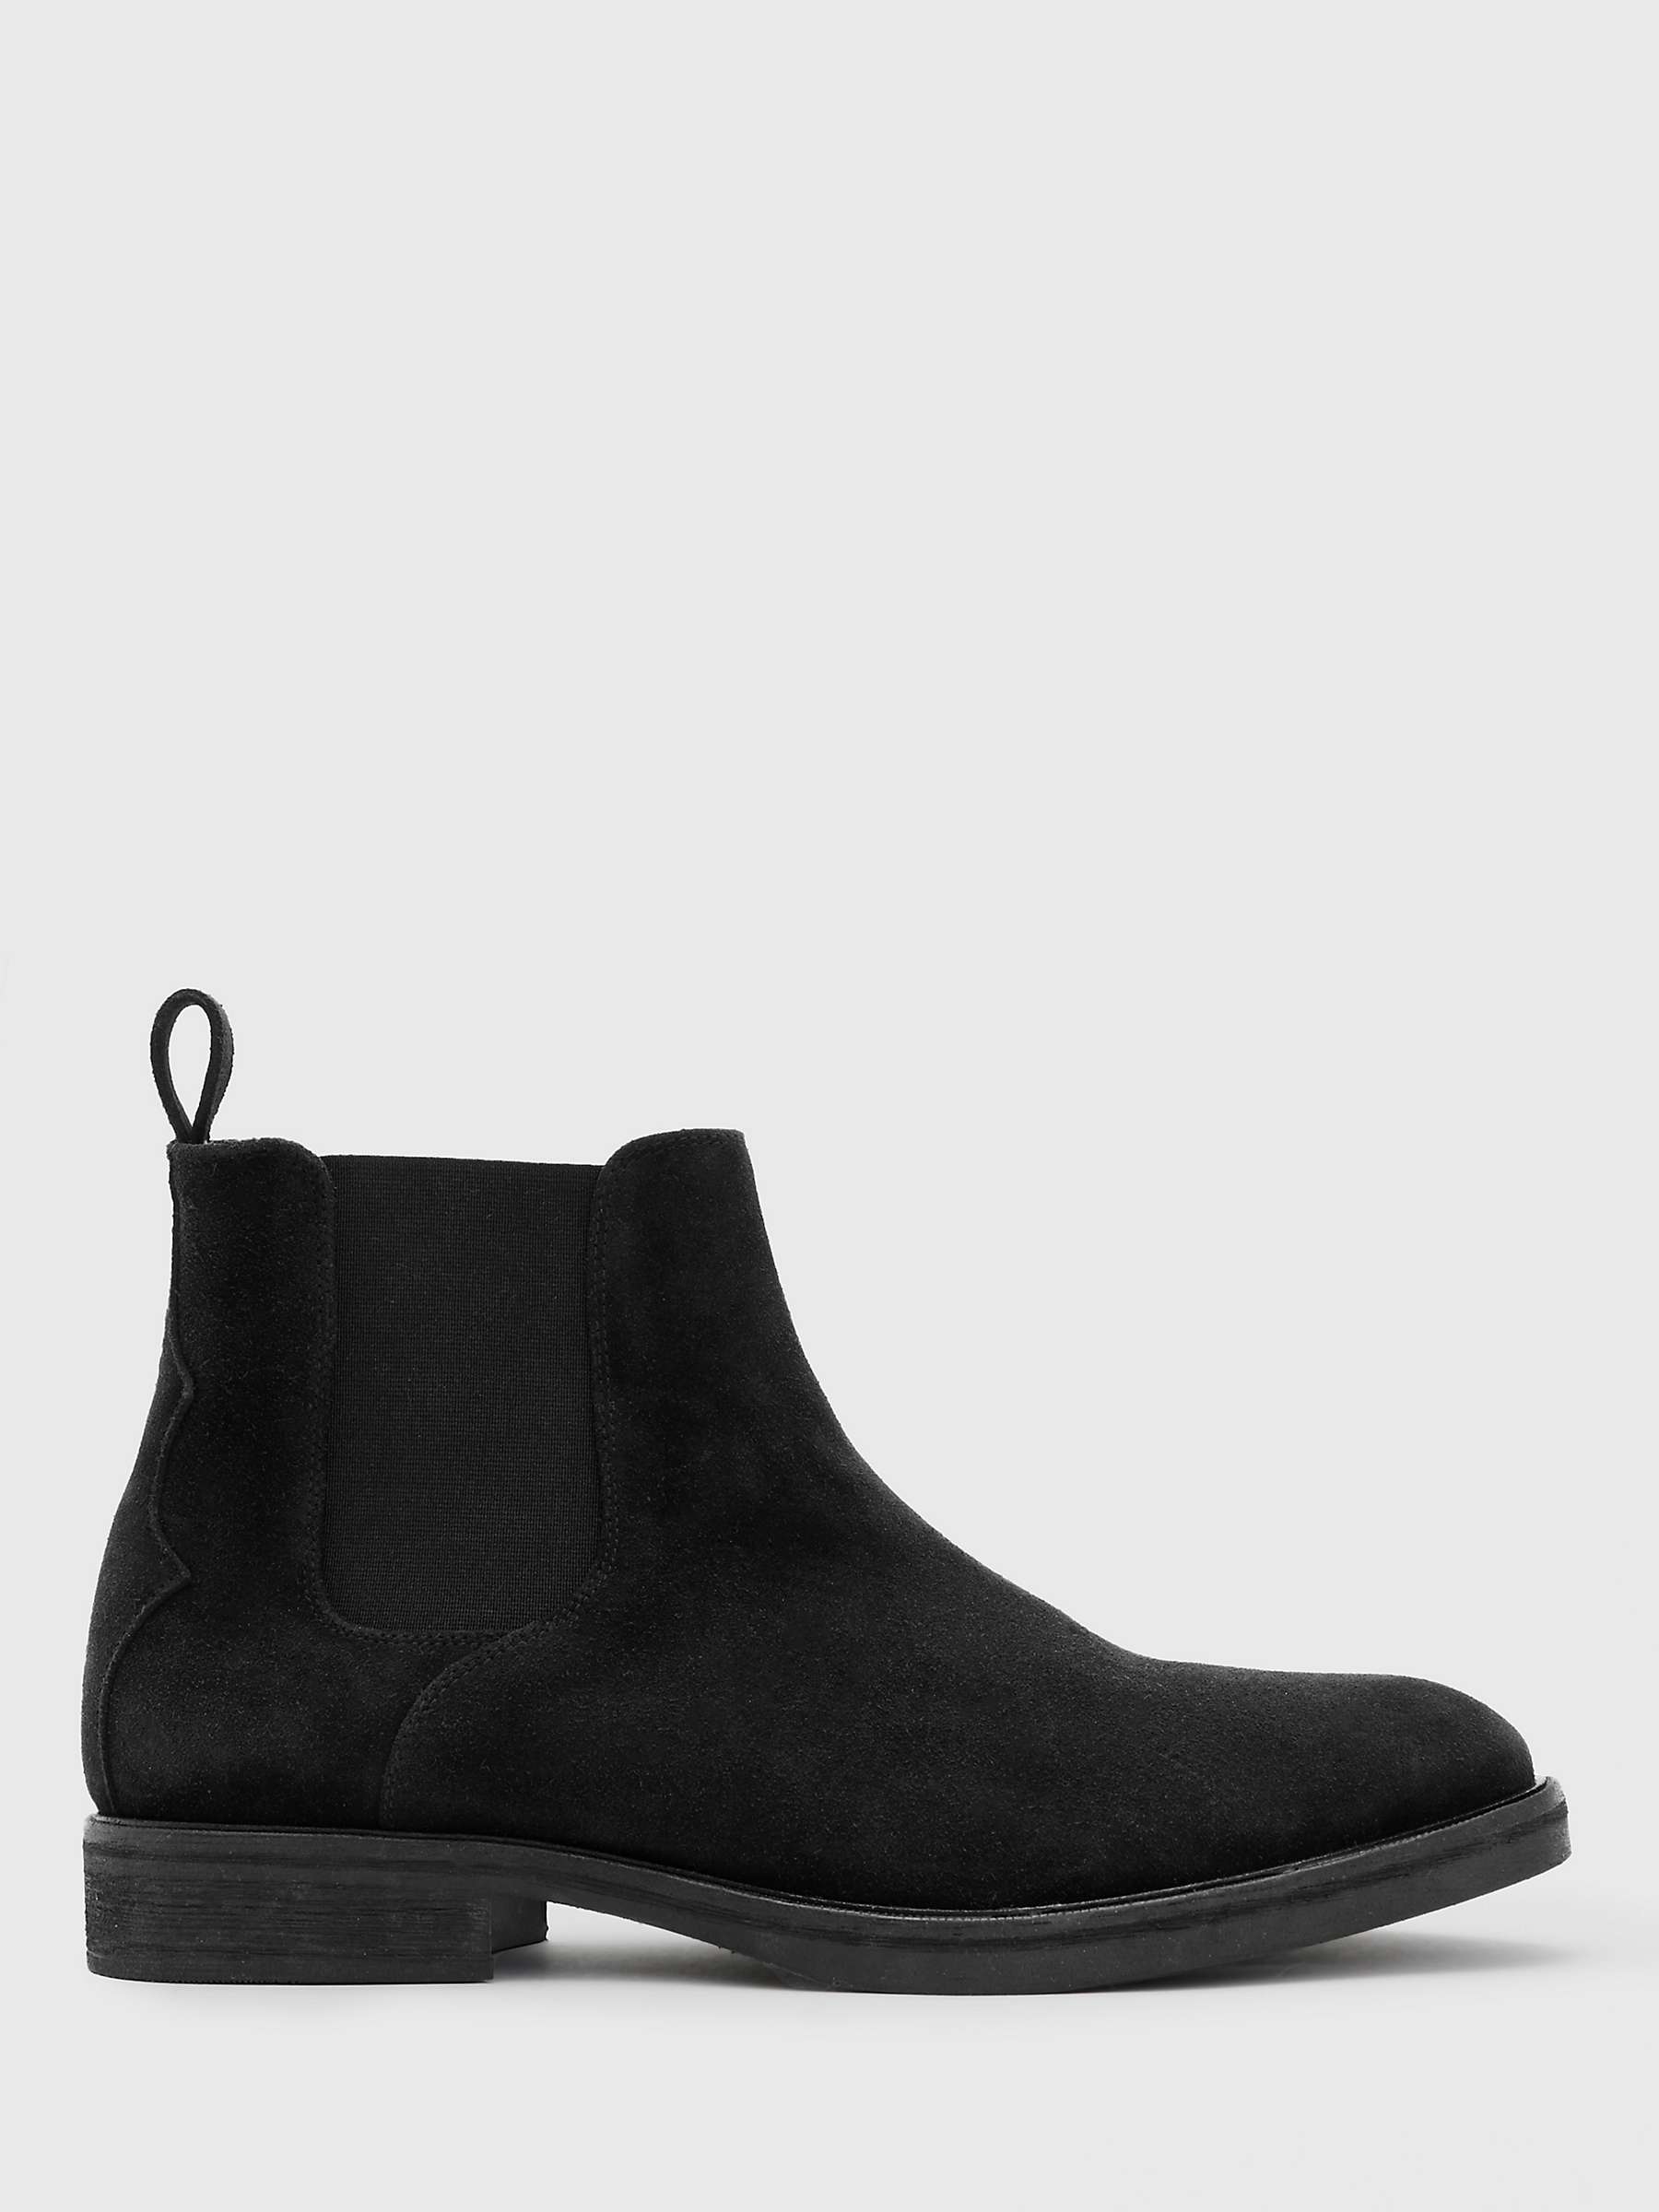 Buy AllSaints Creed Suede Chelsea Boots, Black Online at johnlewis.com